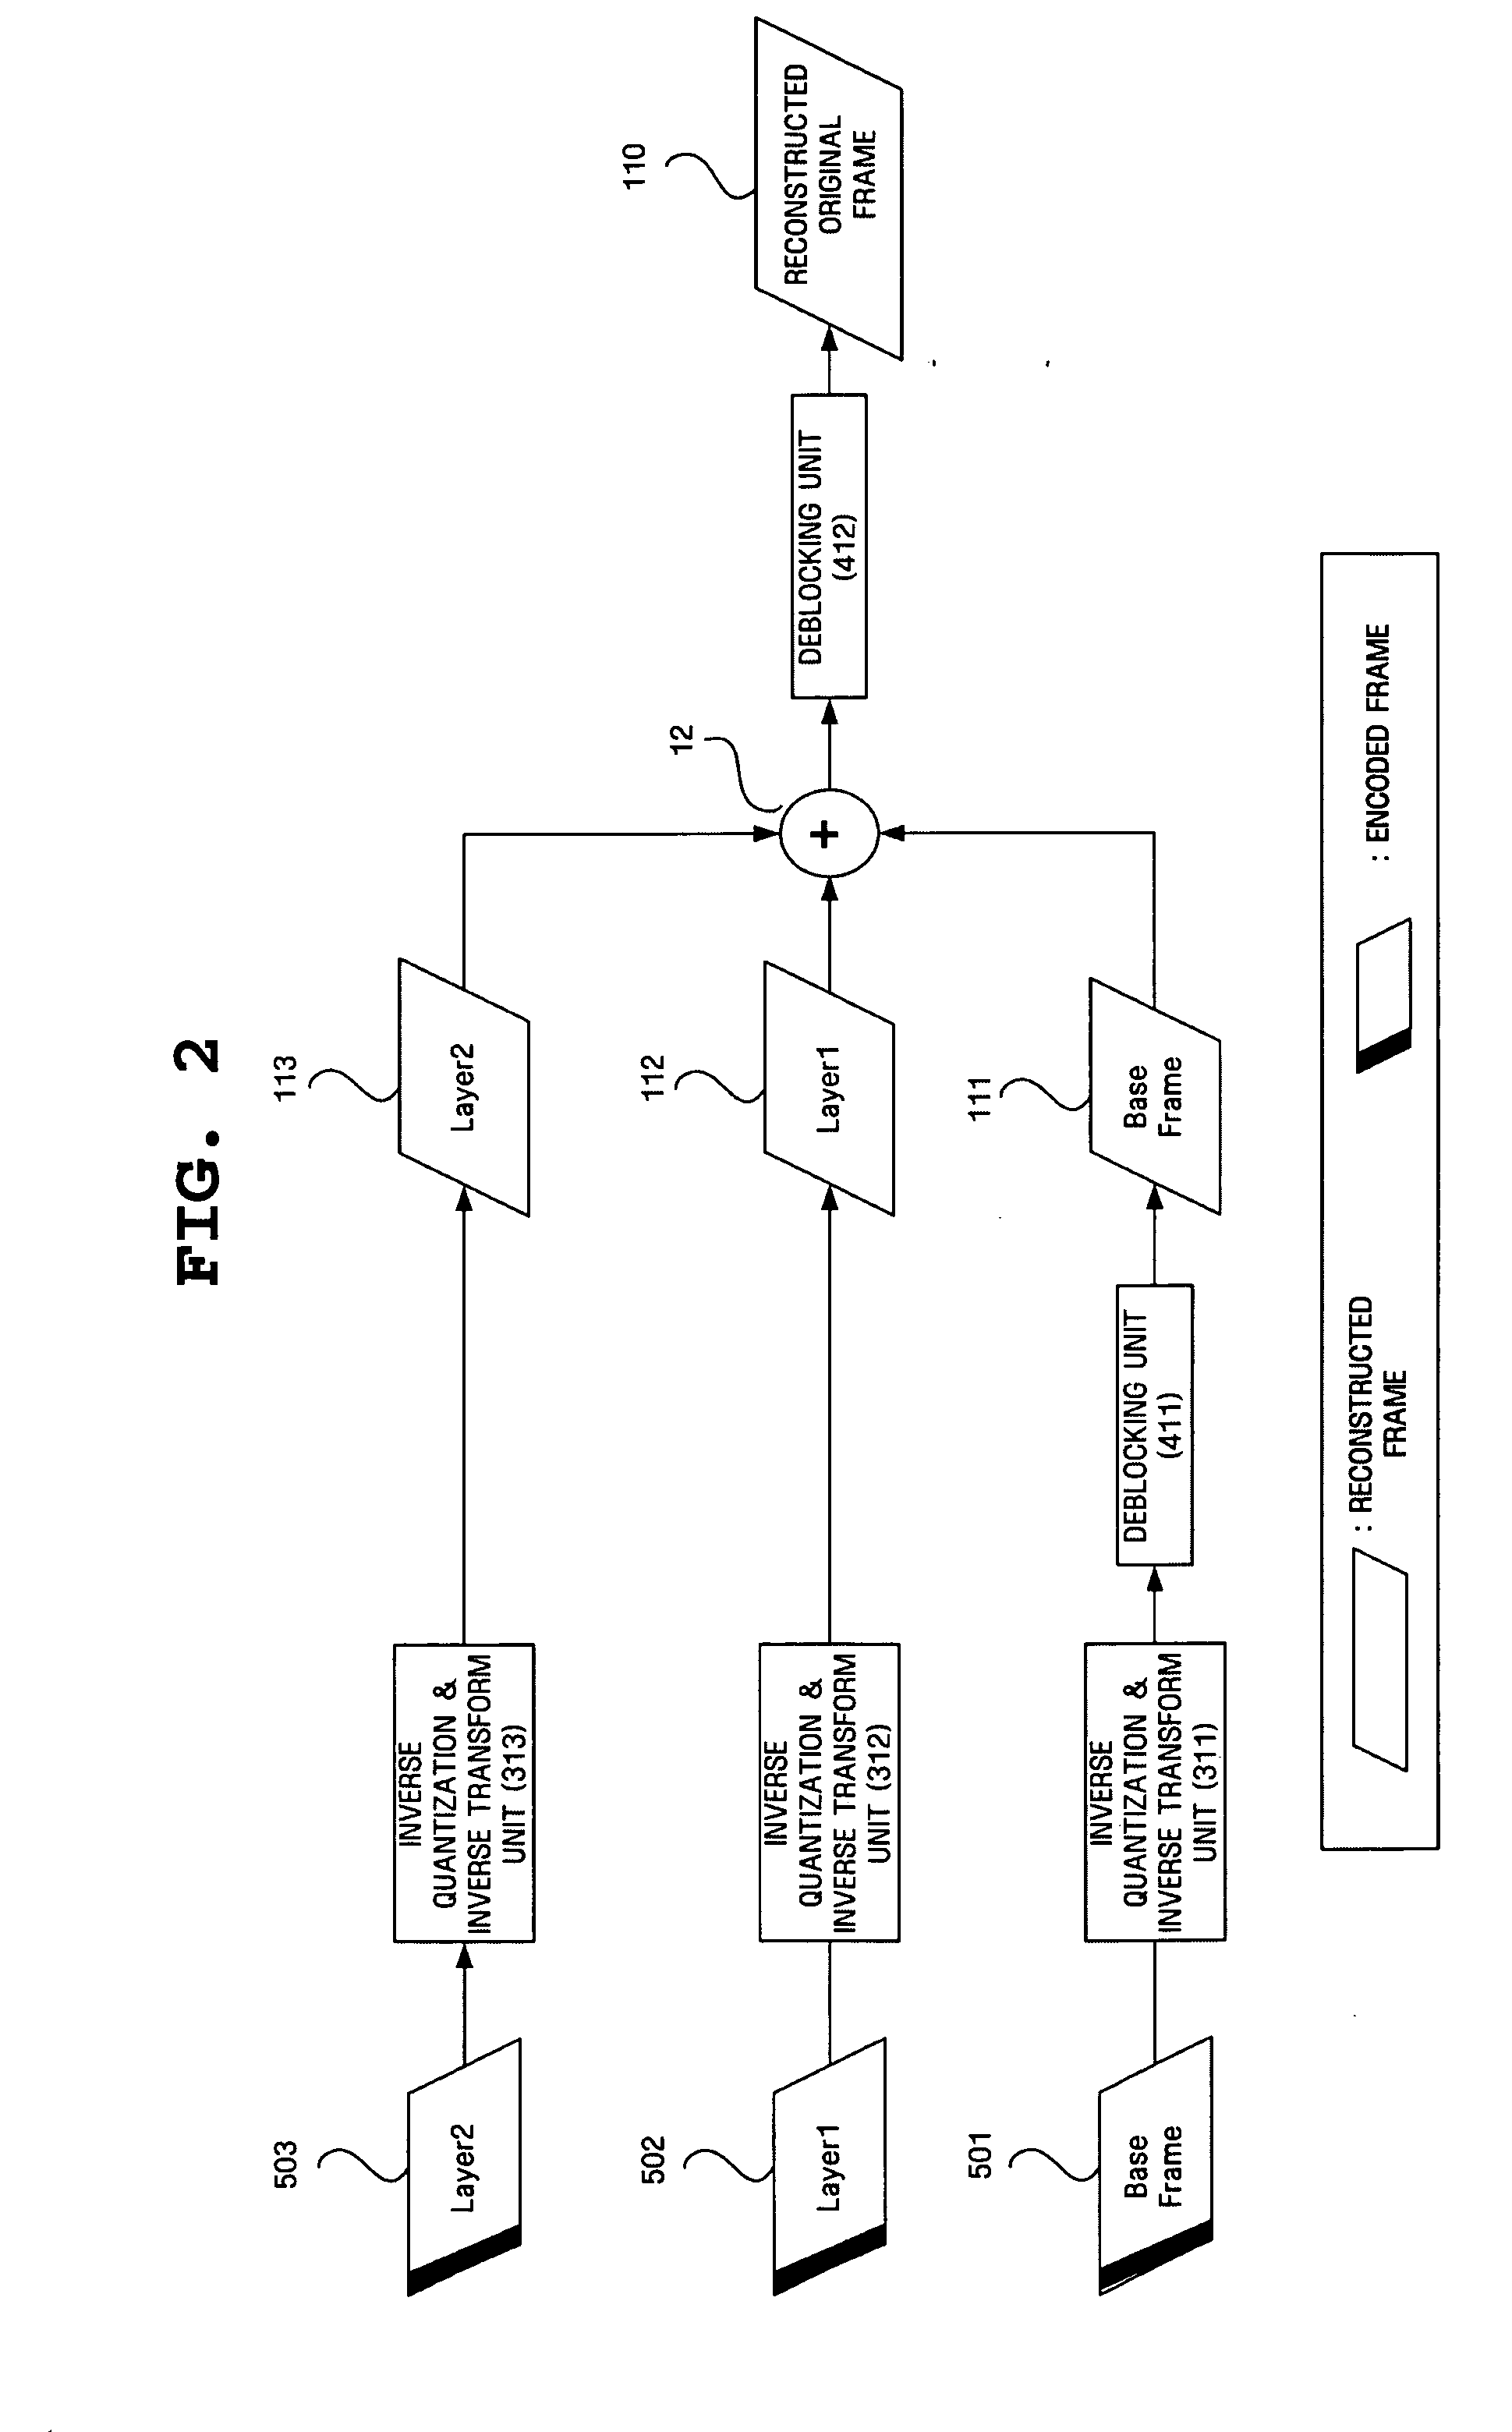 Fine granularity scalable video encoding and decoding method and apparatus capable of controlling deblocking